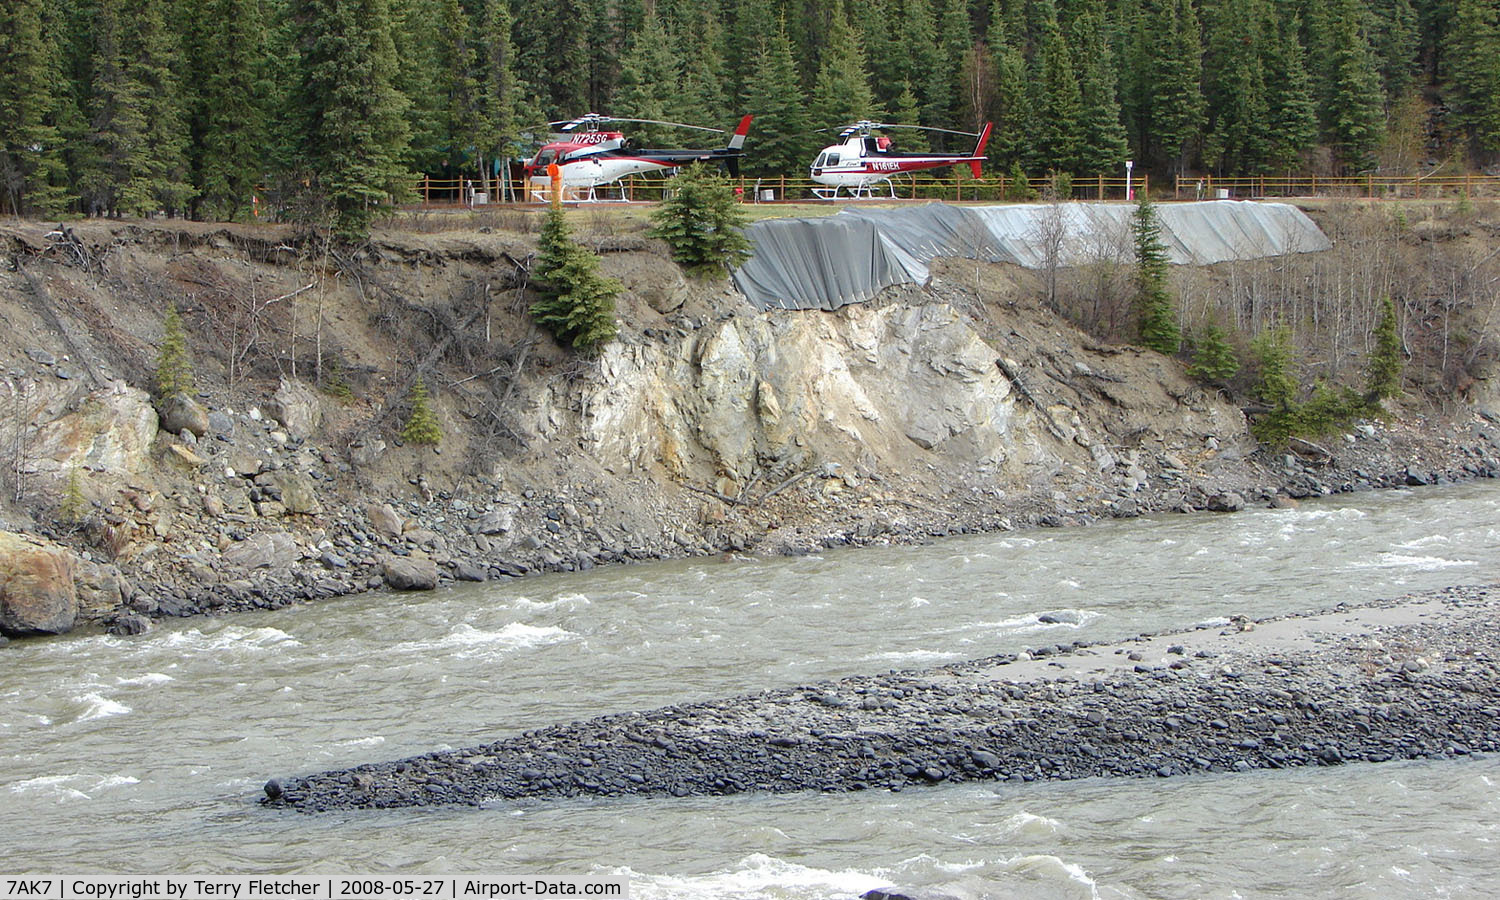 Era Denali Heliport (7AK7) - Era helicopters have this Heliport perched high on a cliff above the Nenama River in Denali